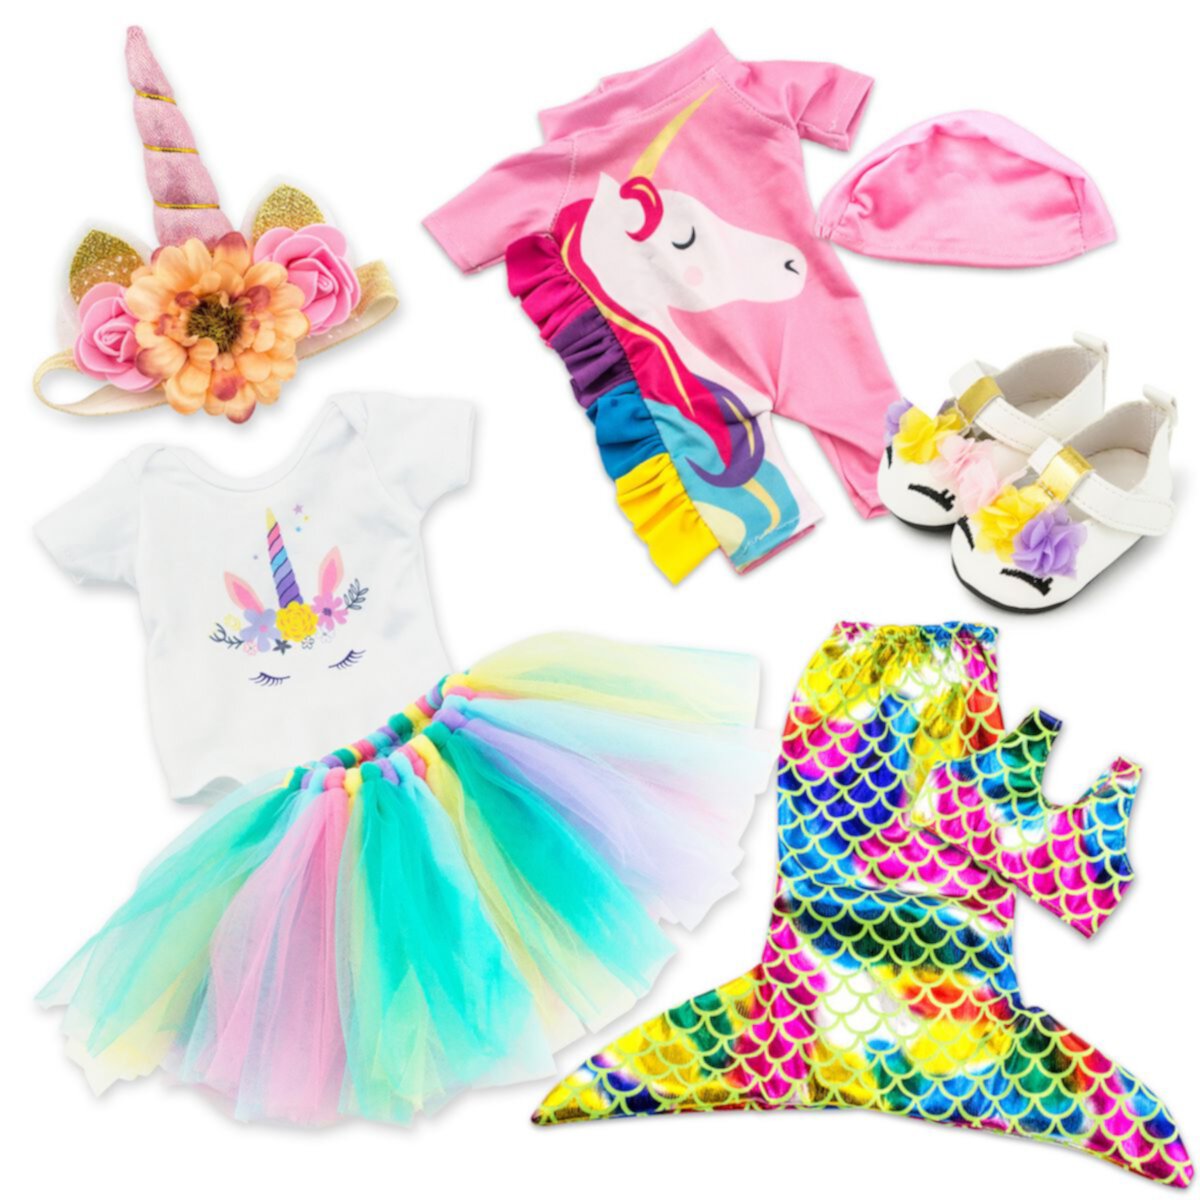 F.C Design Doll Clothes for American Girl 18 inch Dolls Mermaid Outfit Unicorn Tutu Dress Swimsuit F.C Design